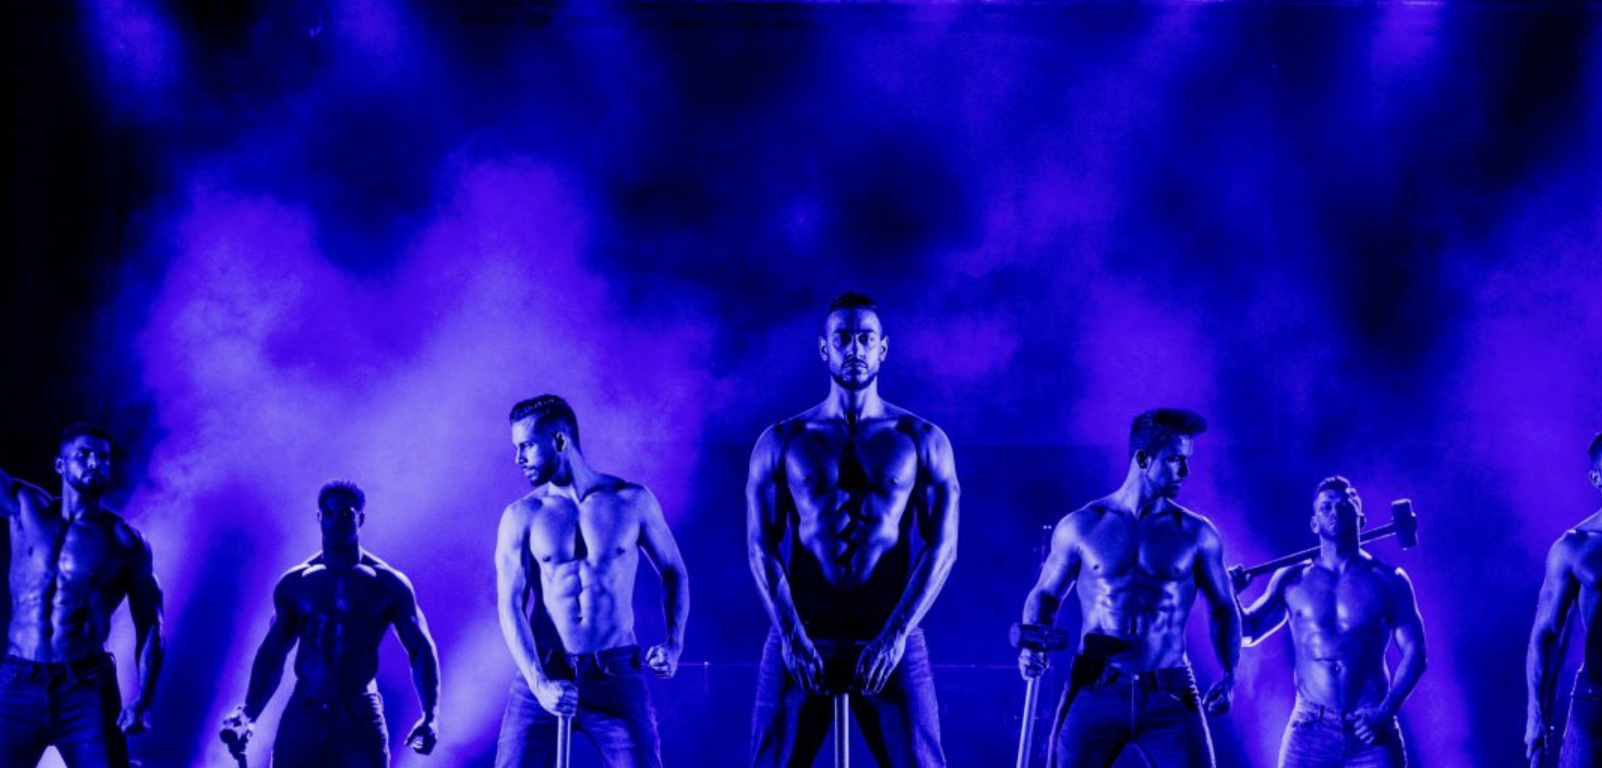 THE CHIPPENDALES am 26. March 2023 @ Sporthalle Alpenstraße.